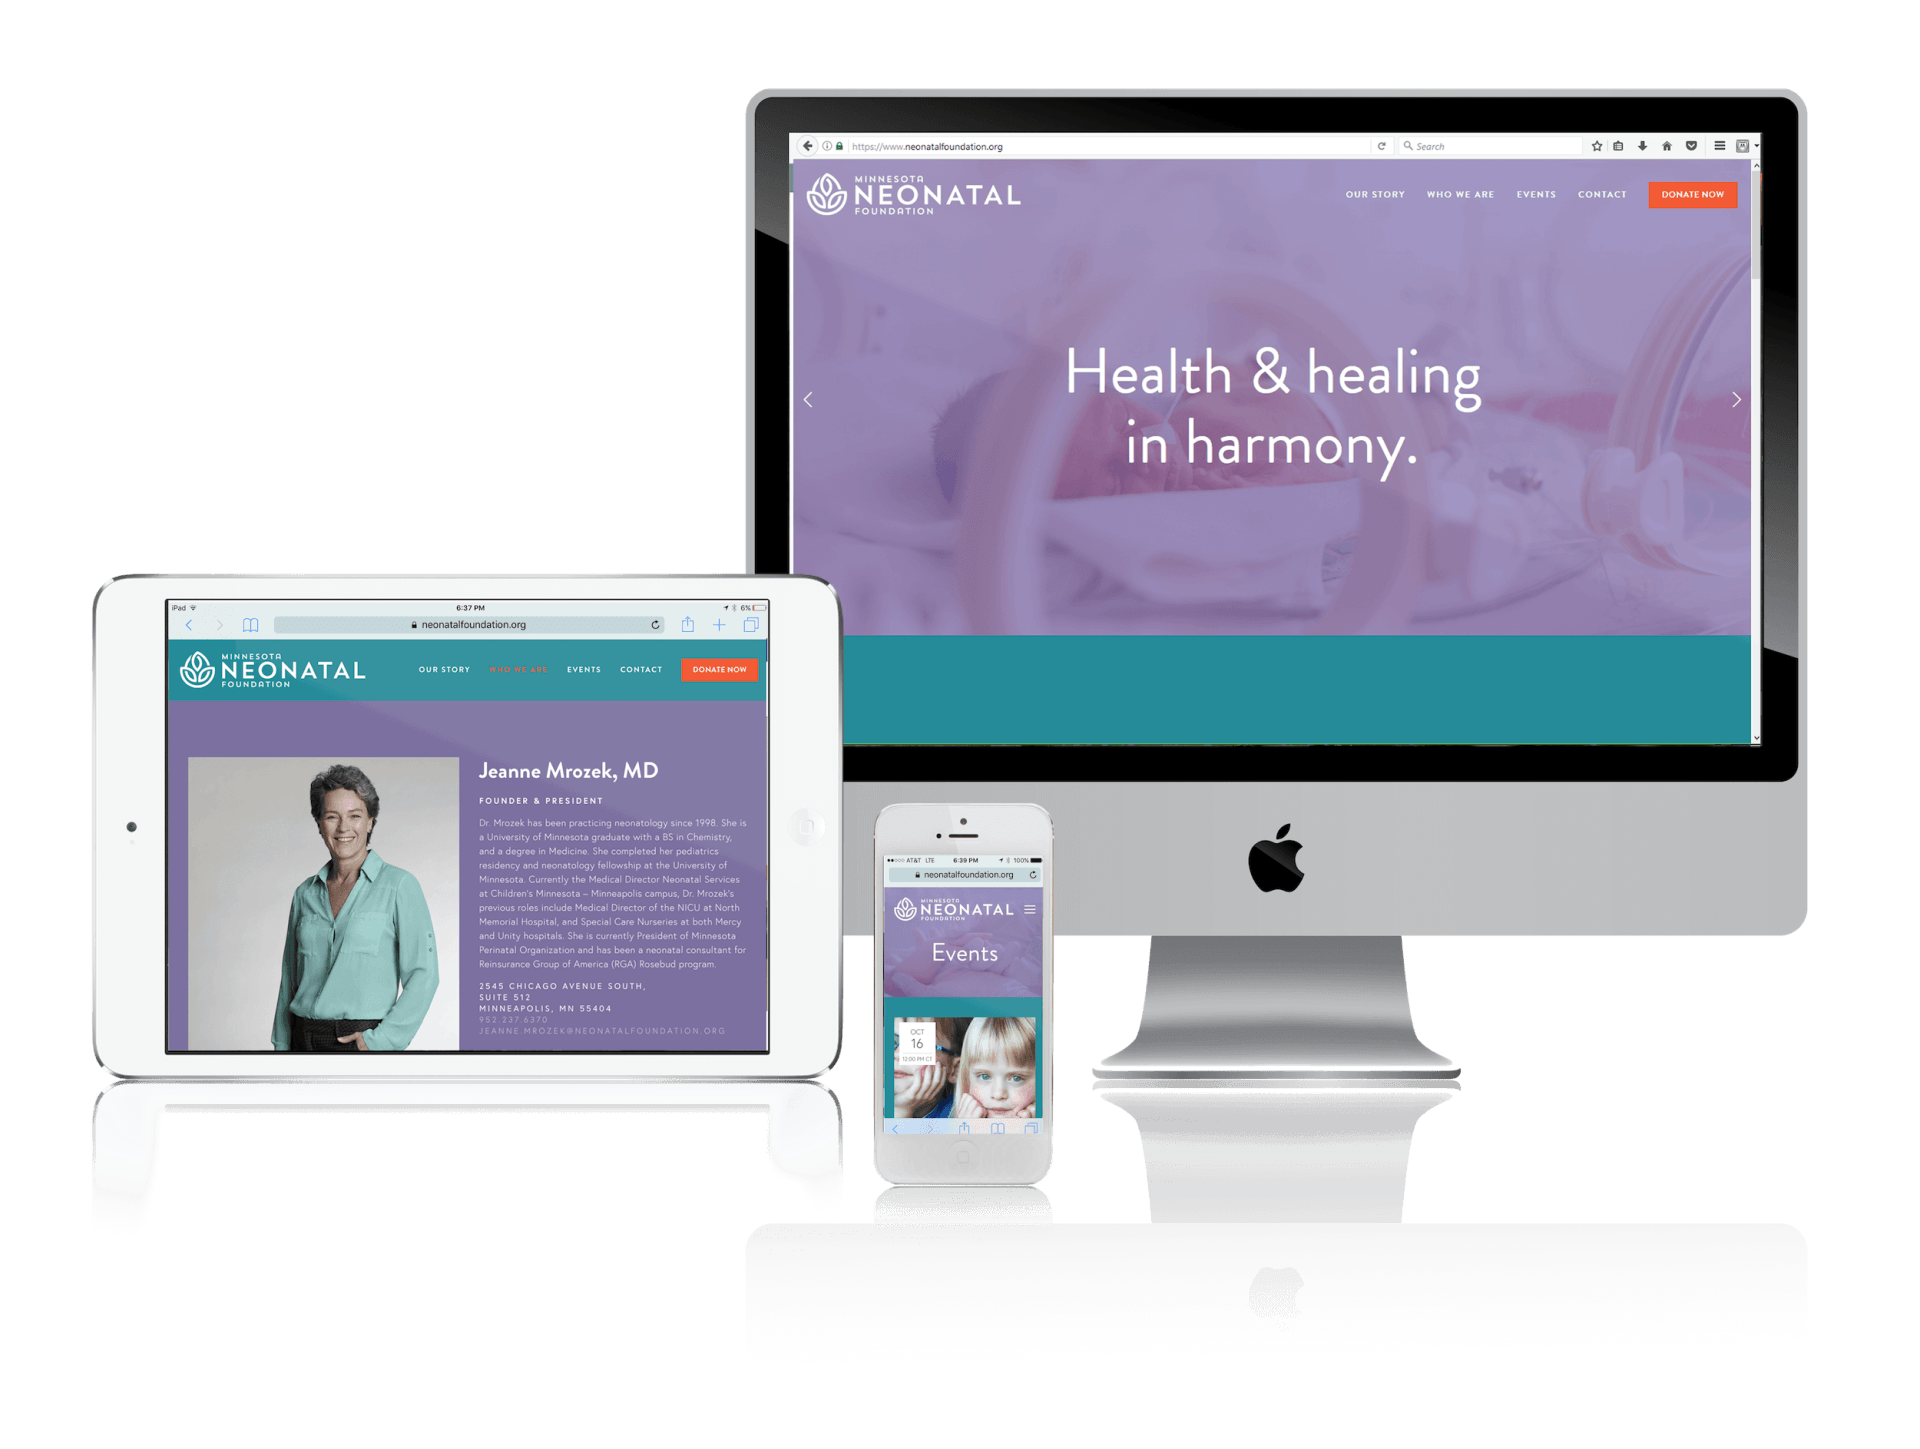 Squarespace for Nonprofits in the Medical Sector